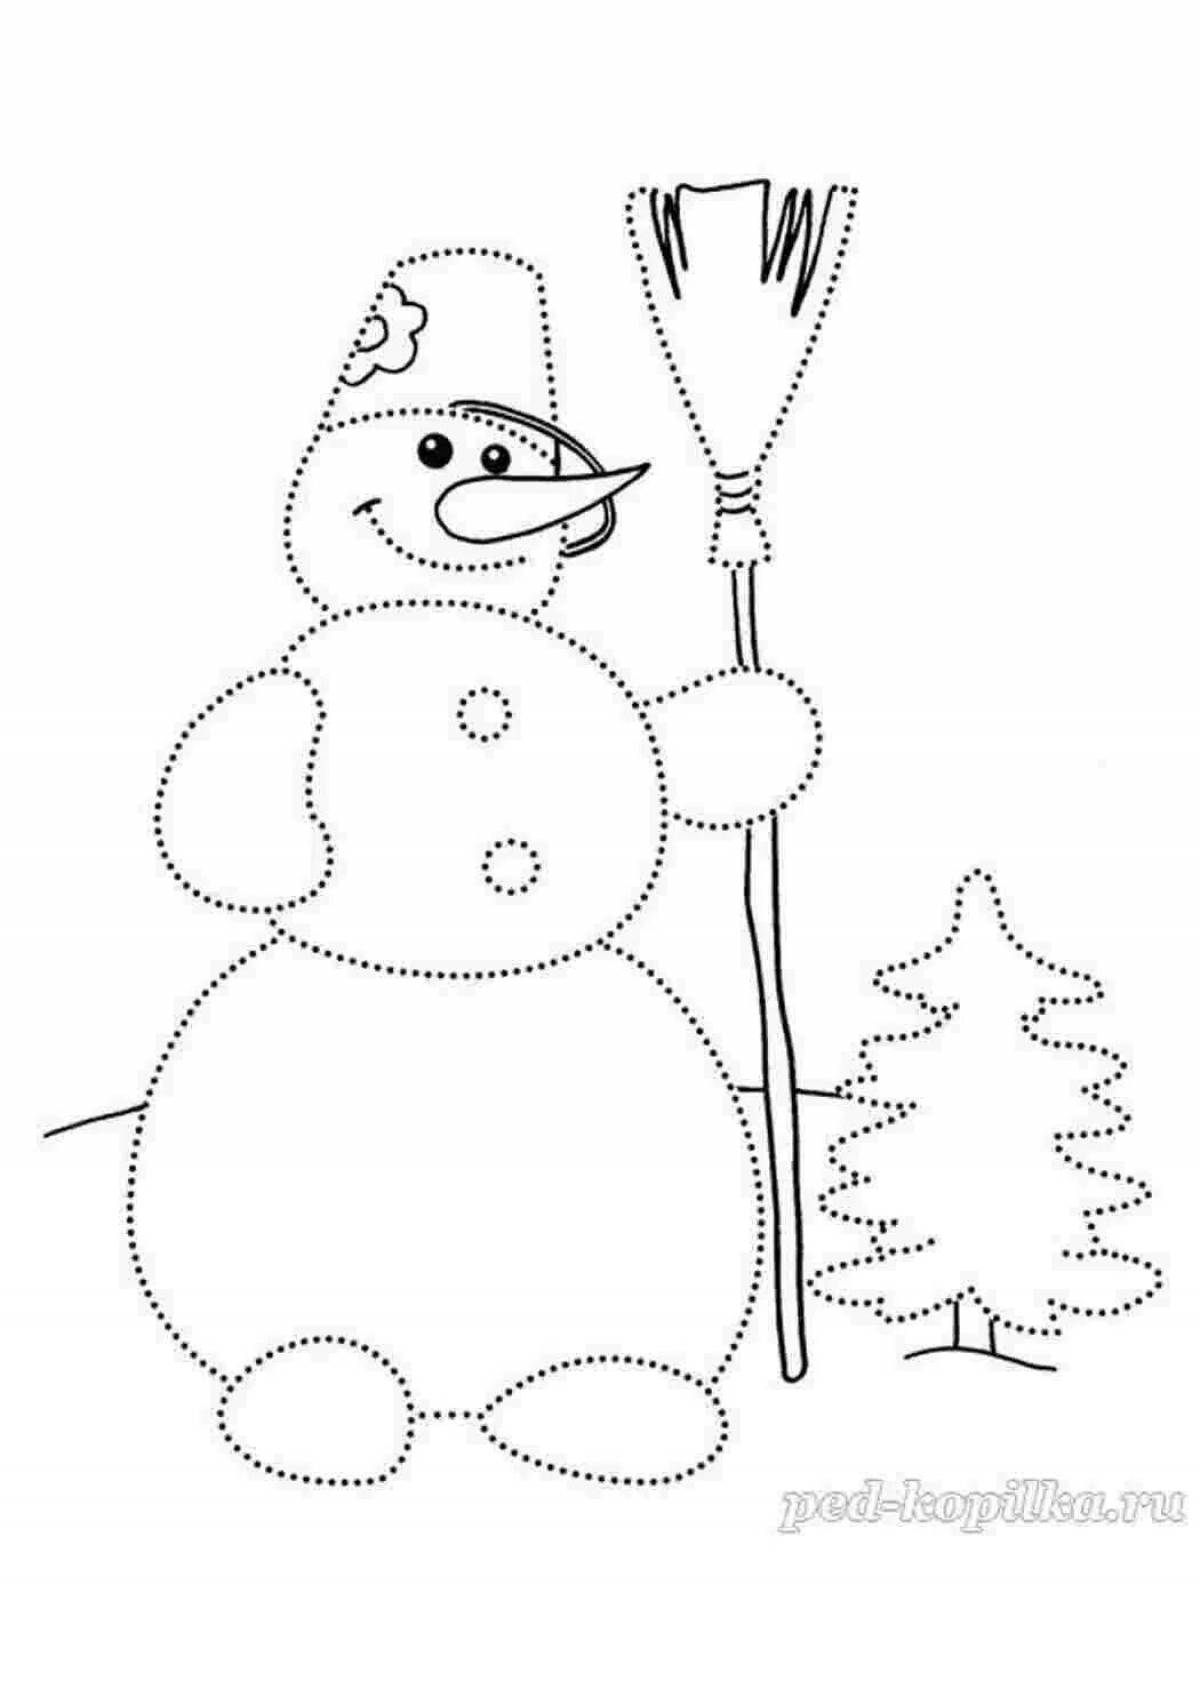 Playful winter coloring book for children 2-3 years old